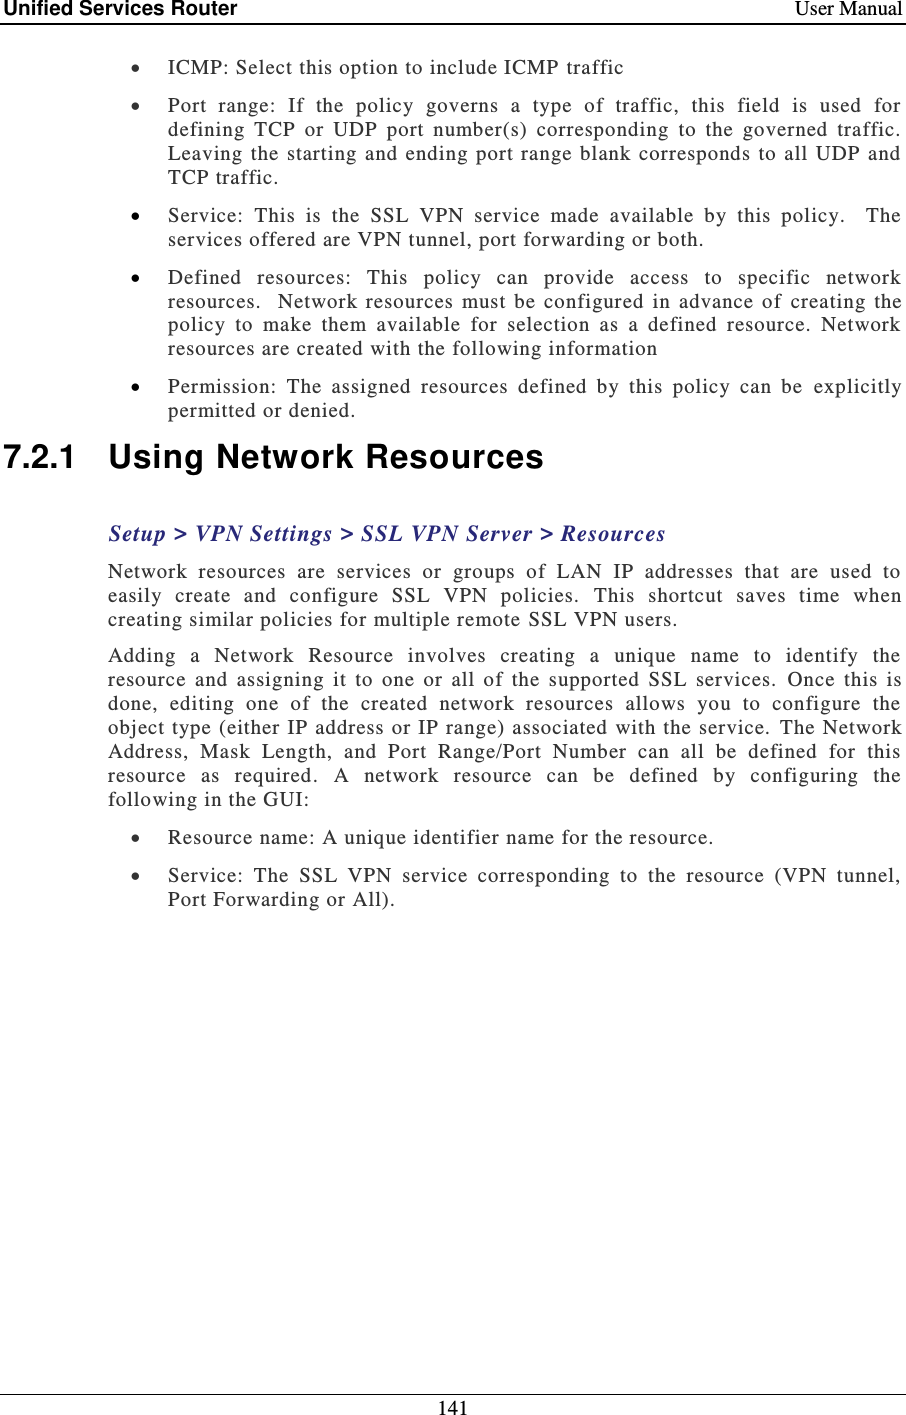 Unified Services Router    User Manual 141   ICMP: Select this option to include ICMP  traffic  Port  range:  If  the  policy  governs  a  type  of  traffic,  this  field  is  used  for defining  TCP  or  UDP  port  number(s)  corresponding  to  the  governed  traffic.  Leaving the  starting and ending  port  range  blank corresponds to all  UDP  and TCP traffic.  Service:  This  is  the  SSL  VPN  service  made  available  by  this  policy.    The services offered are VPN tunnel, port forwarding or both.   Defined  resources:  This  policy  can  provide  access  to  specific  network resources.    Network  resources  must  be  configured  in  advance  of  creating  the policy  to  make  them  available  for  selection  as  a  defined  resource.  Network resources are created with the following information  Permission:  The  assigned  resources  defined  by  this  policy  can  be   explicitly permitted or denied. 7.2.1  Using Network Resources  Setup &gt; VPN Settings &gt; SSL VPN Server &gt; Resources Network  resources  are  services  or  groups  of  LAN  IP  addresses  that  are  used  to easily  create  and  configure  SSL  VPN  policies.   This  shortcut  saves  time  when creating similar policies for multiple remote  SSL VPN users.  Adding  a  Network  Resource  involves  creating  a  unique  name  to  identify  the resource  and  assigning  it  to  one  or  all  of  the  supported  SSL  services.   Once  this  is done,  editing  one  of  the  created  network  resources  allows  you  to  configure  the object type (either IP address or IP range) associated with the service.  The Network Address,  Mask  Length,  and  Port  Range/Port  Number  can  all  be  defined  for  this resource  as  required.  A  network  resource  can  be  defined  by  configuring  the following in the GUI:  Resource name: A unique identifier name for the resource.   Service:  The  SSL  VPN  service  corresponding  to  the  resource  (VPN  tunnel, Port Forwarding or All). 